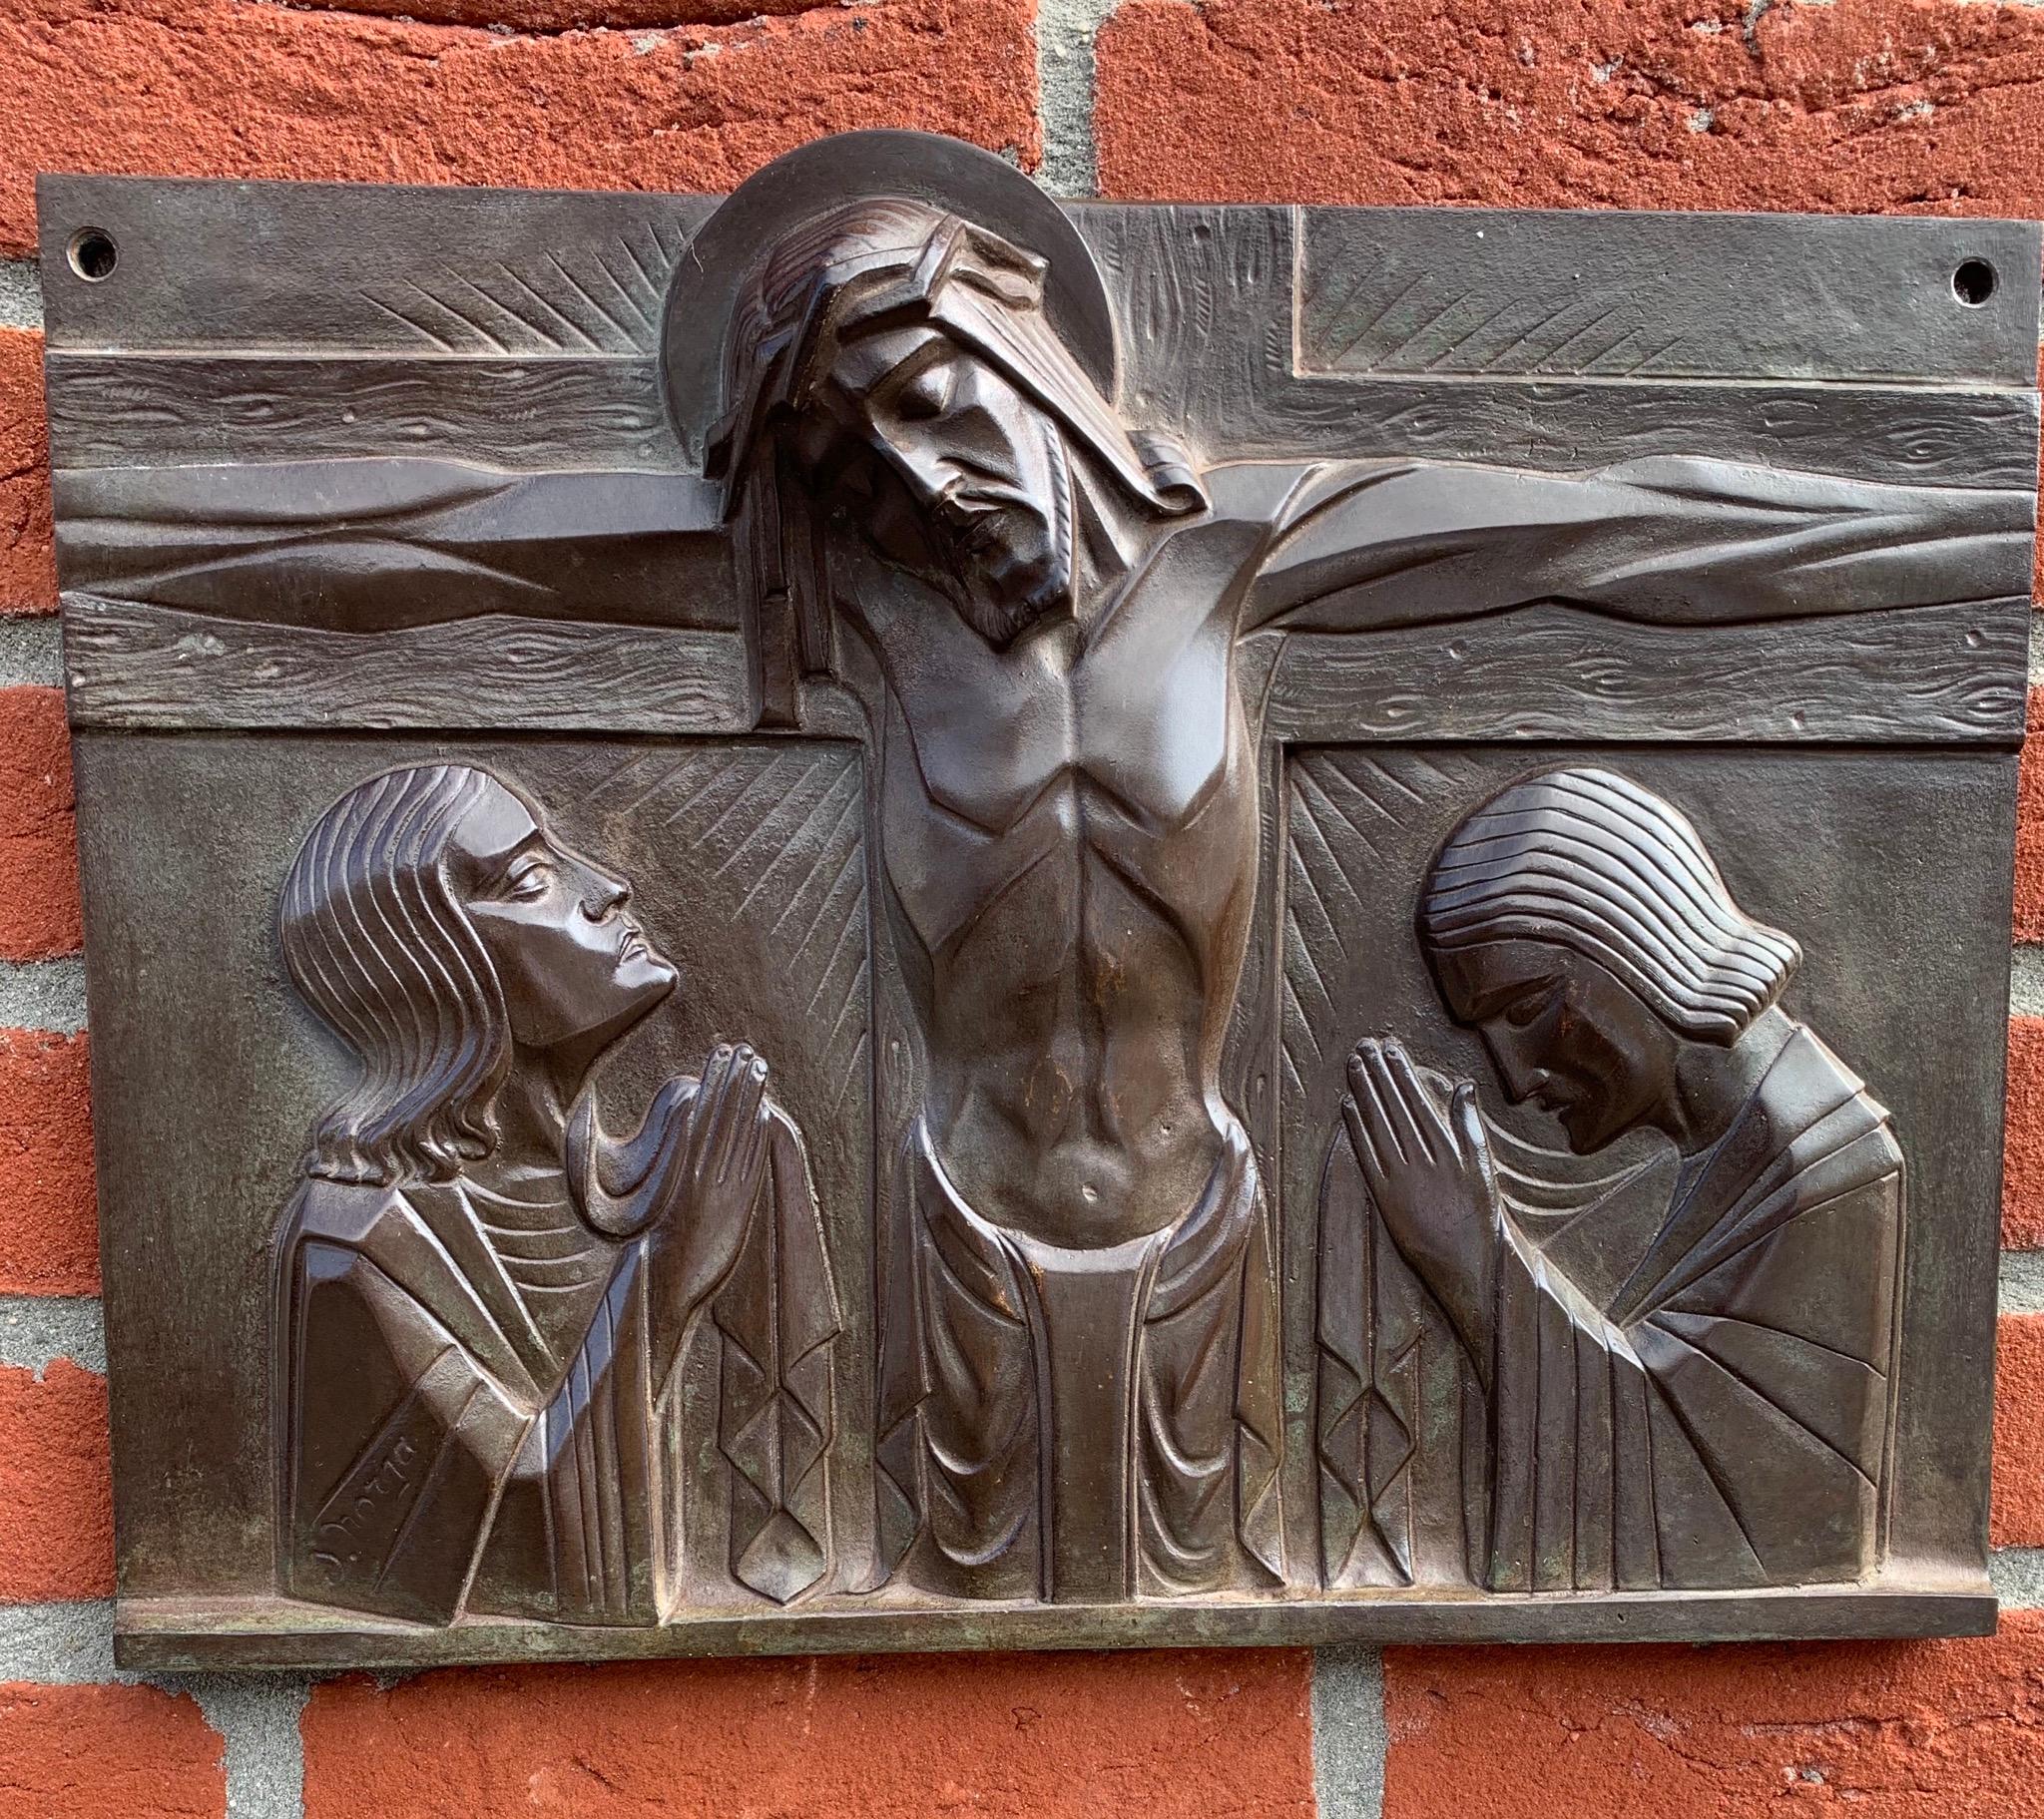 Perfectly stylized work of religious art by S. Norga.

This practical size and very good condition bronze plaque depicts Christ on the cross with Mary and Saint John mourning on either side. Sylvain Norga, known for his top quality religious art has